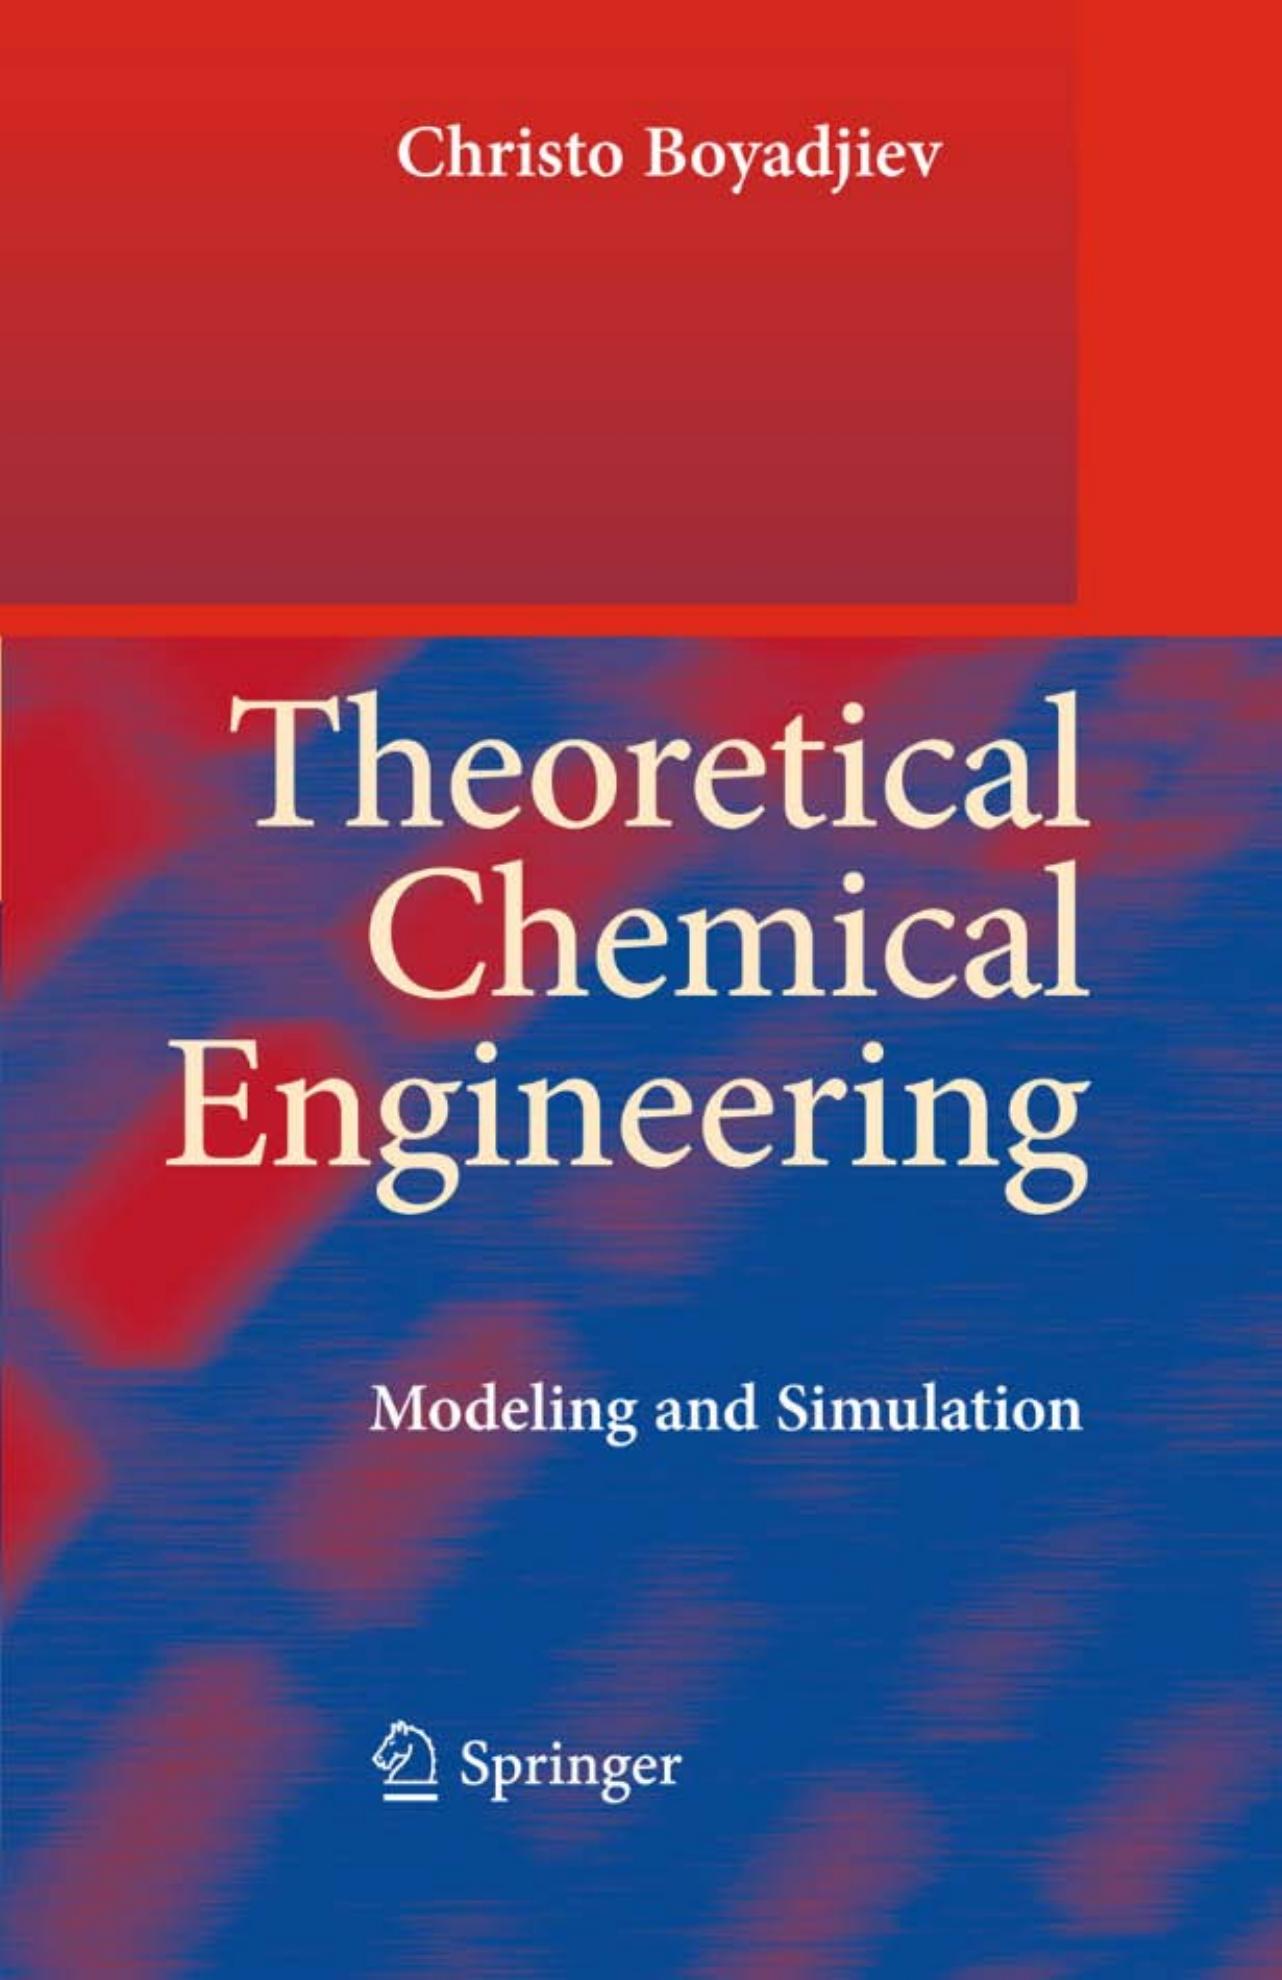 Theoretical Chemical Engineering: Modeling and Simulation